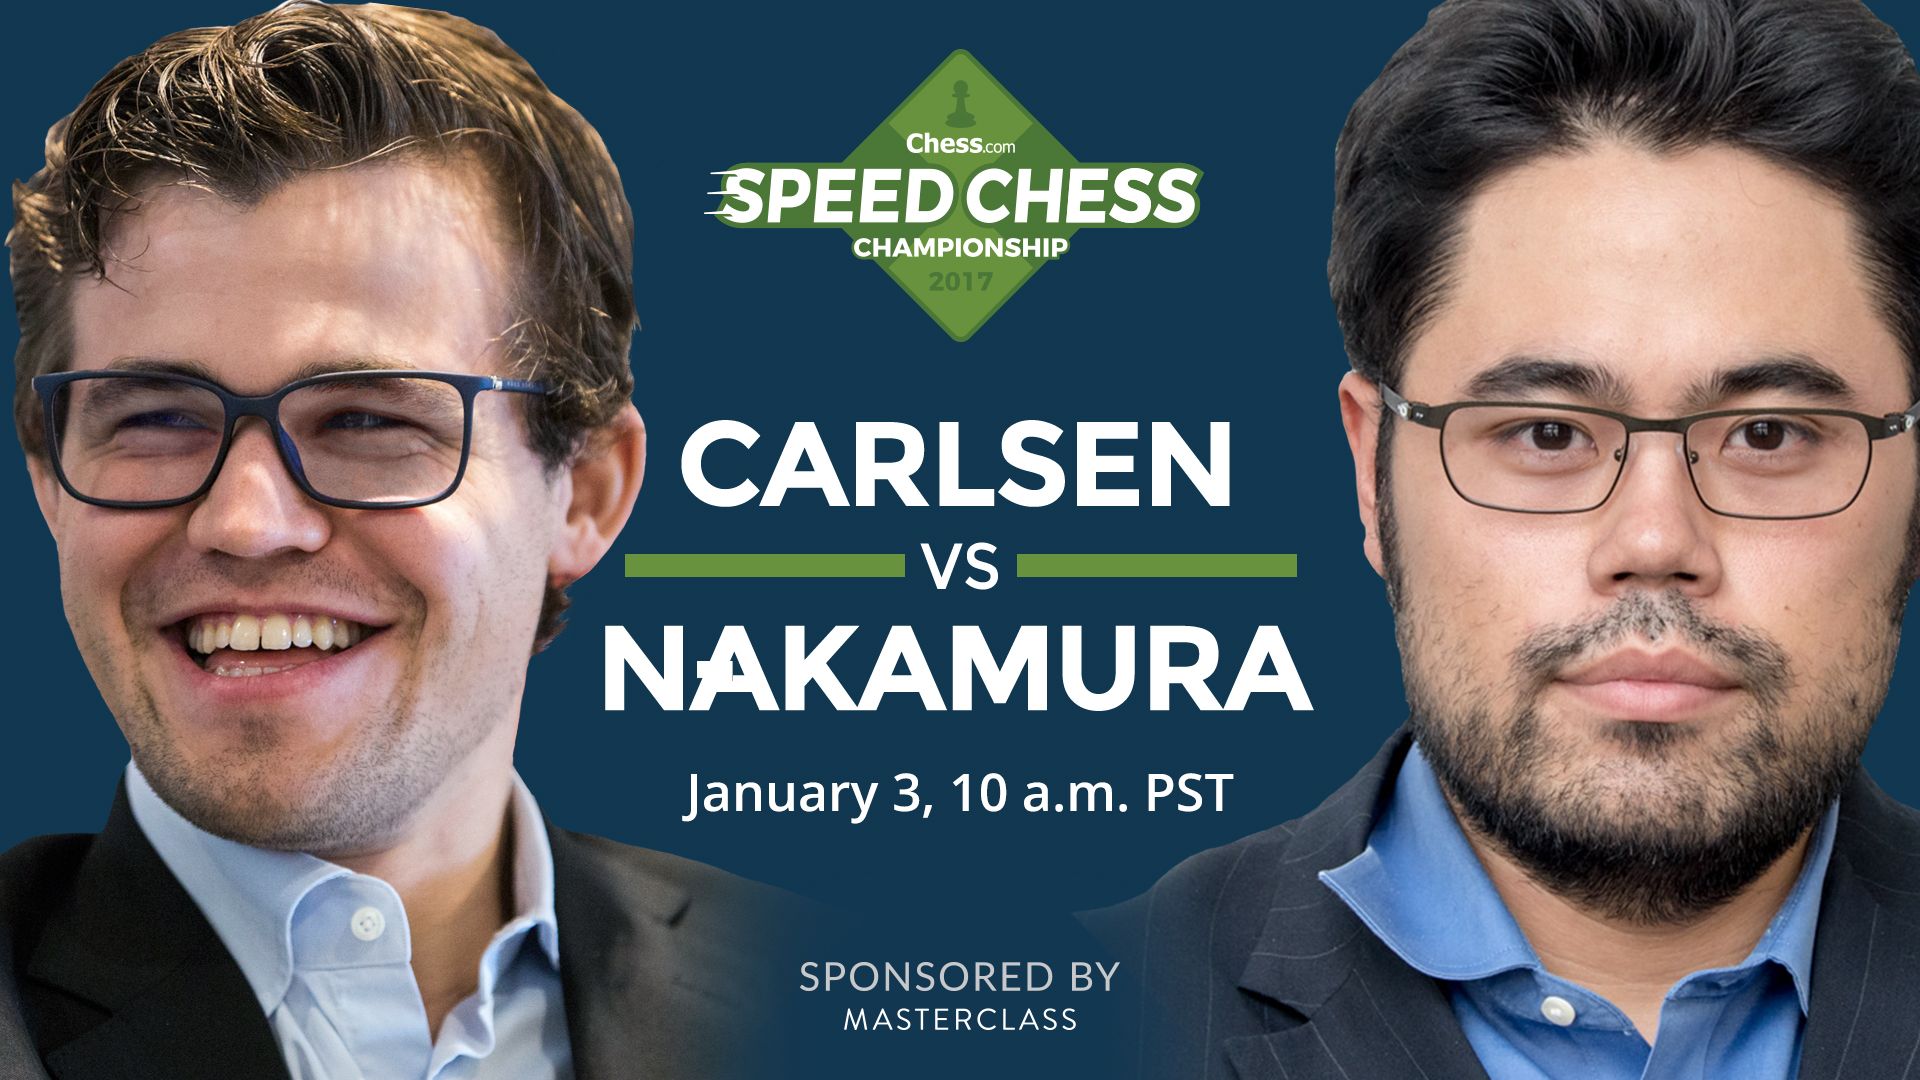 Fast and furious: Carlsen and Nakamura transform chess into an